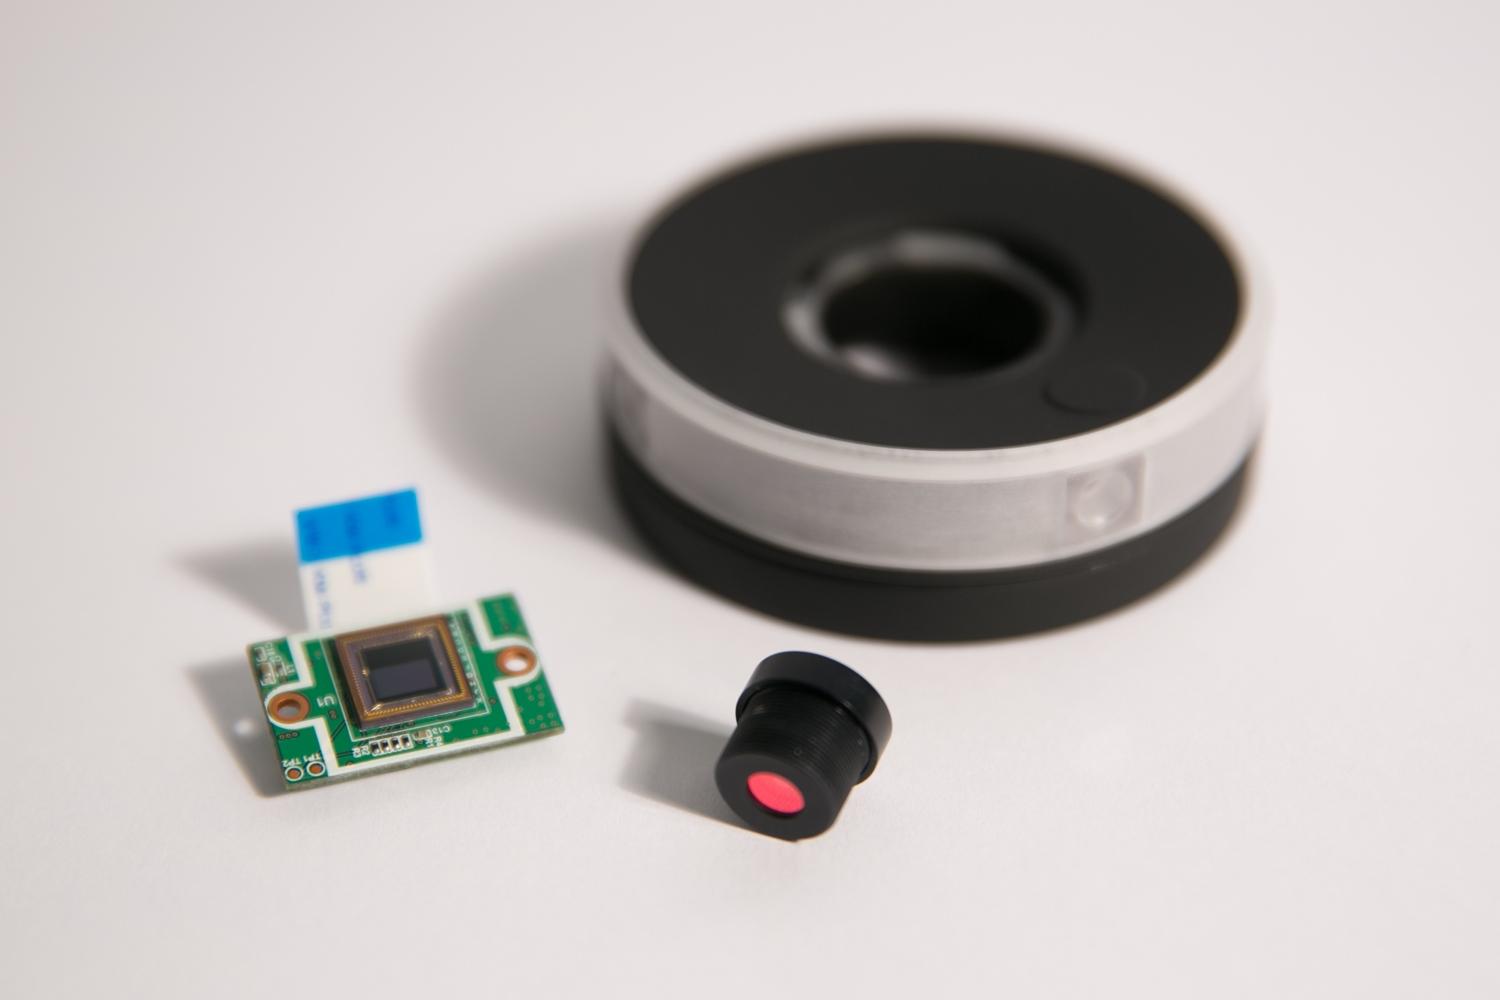 centr camera puts 360 degree panoramic perspective in a small package lense and chip